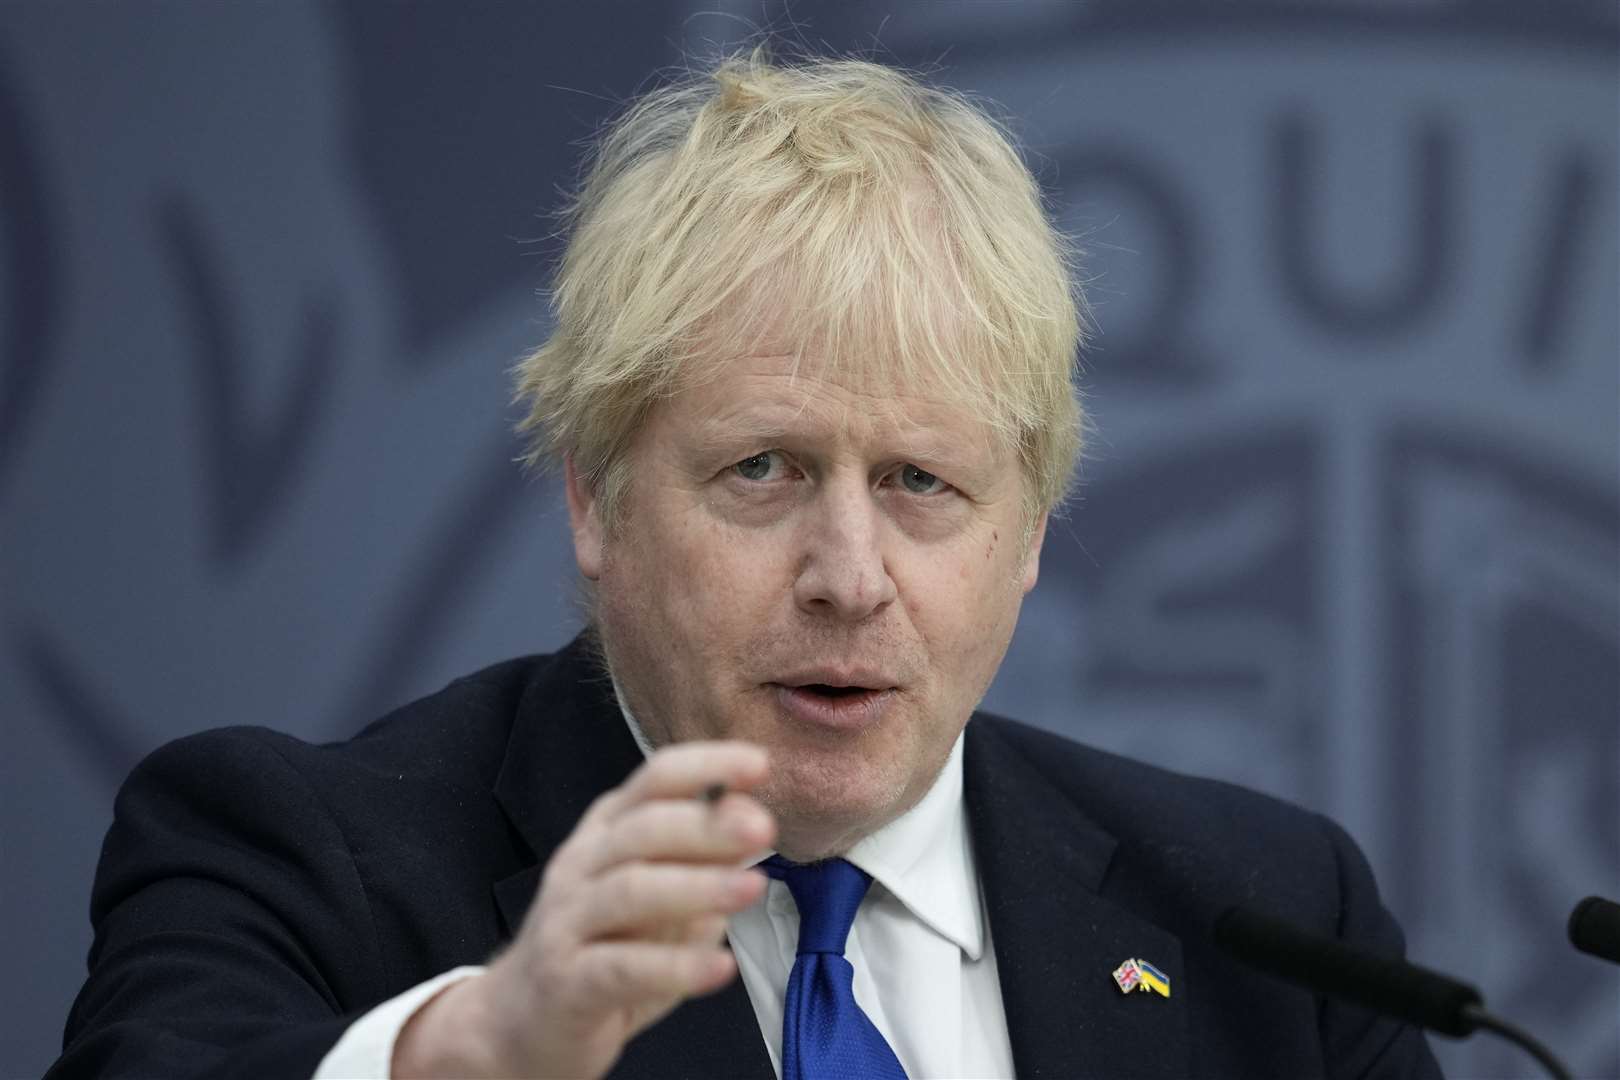 Labour accused Boris Johnson of trying to distract from the ‘partygate’ scandal (Matt Dunham/PA)